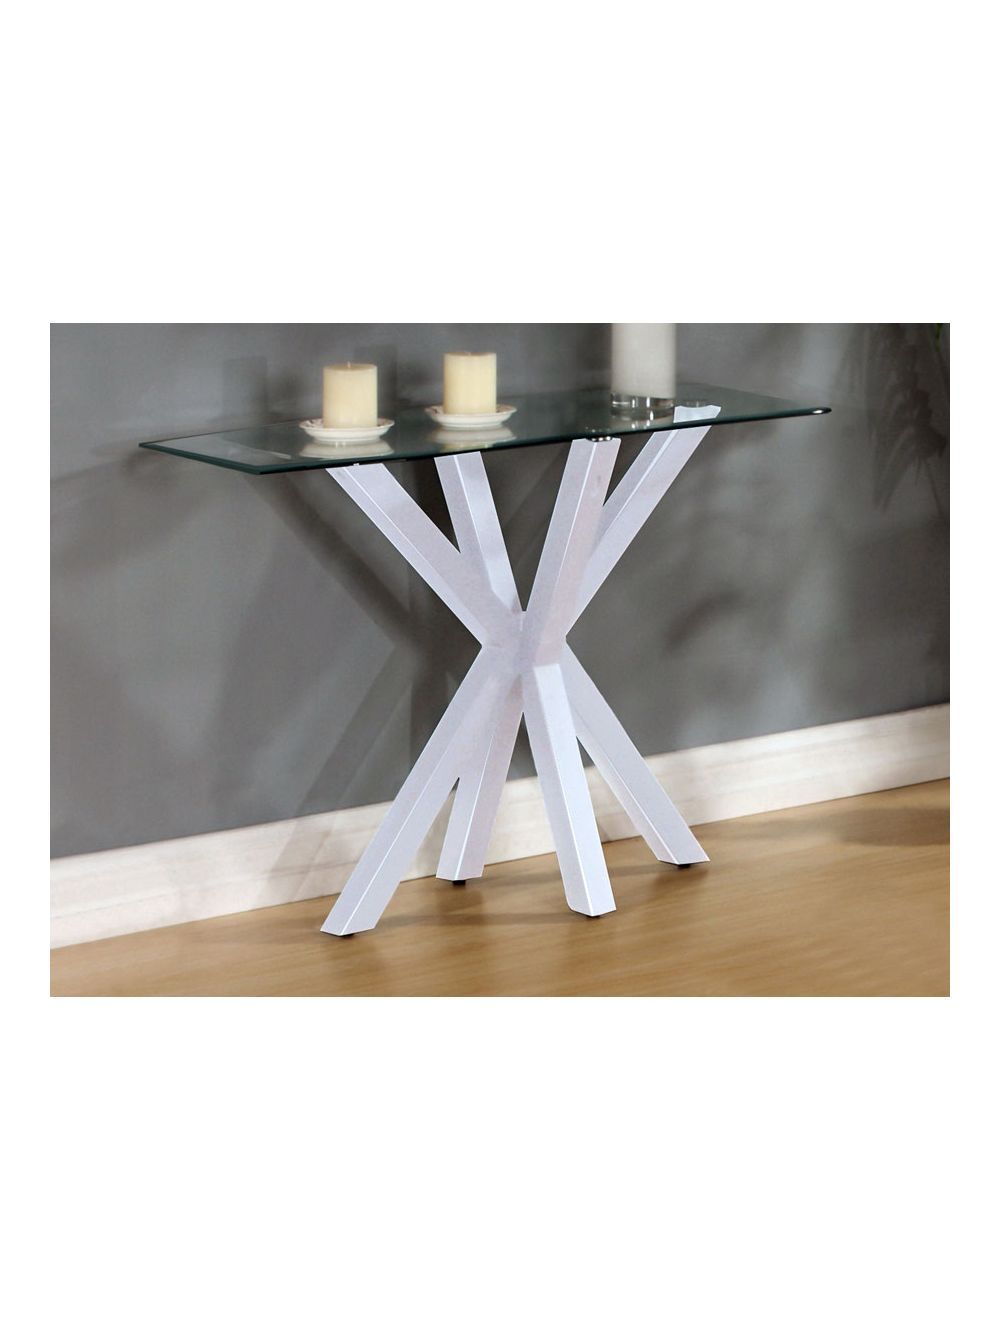 Langley High Gloss White Console Table With Regard To White Gloss And Maple Cream Console Tables (View 12 of 20)